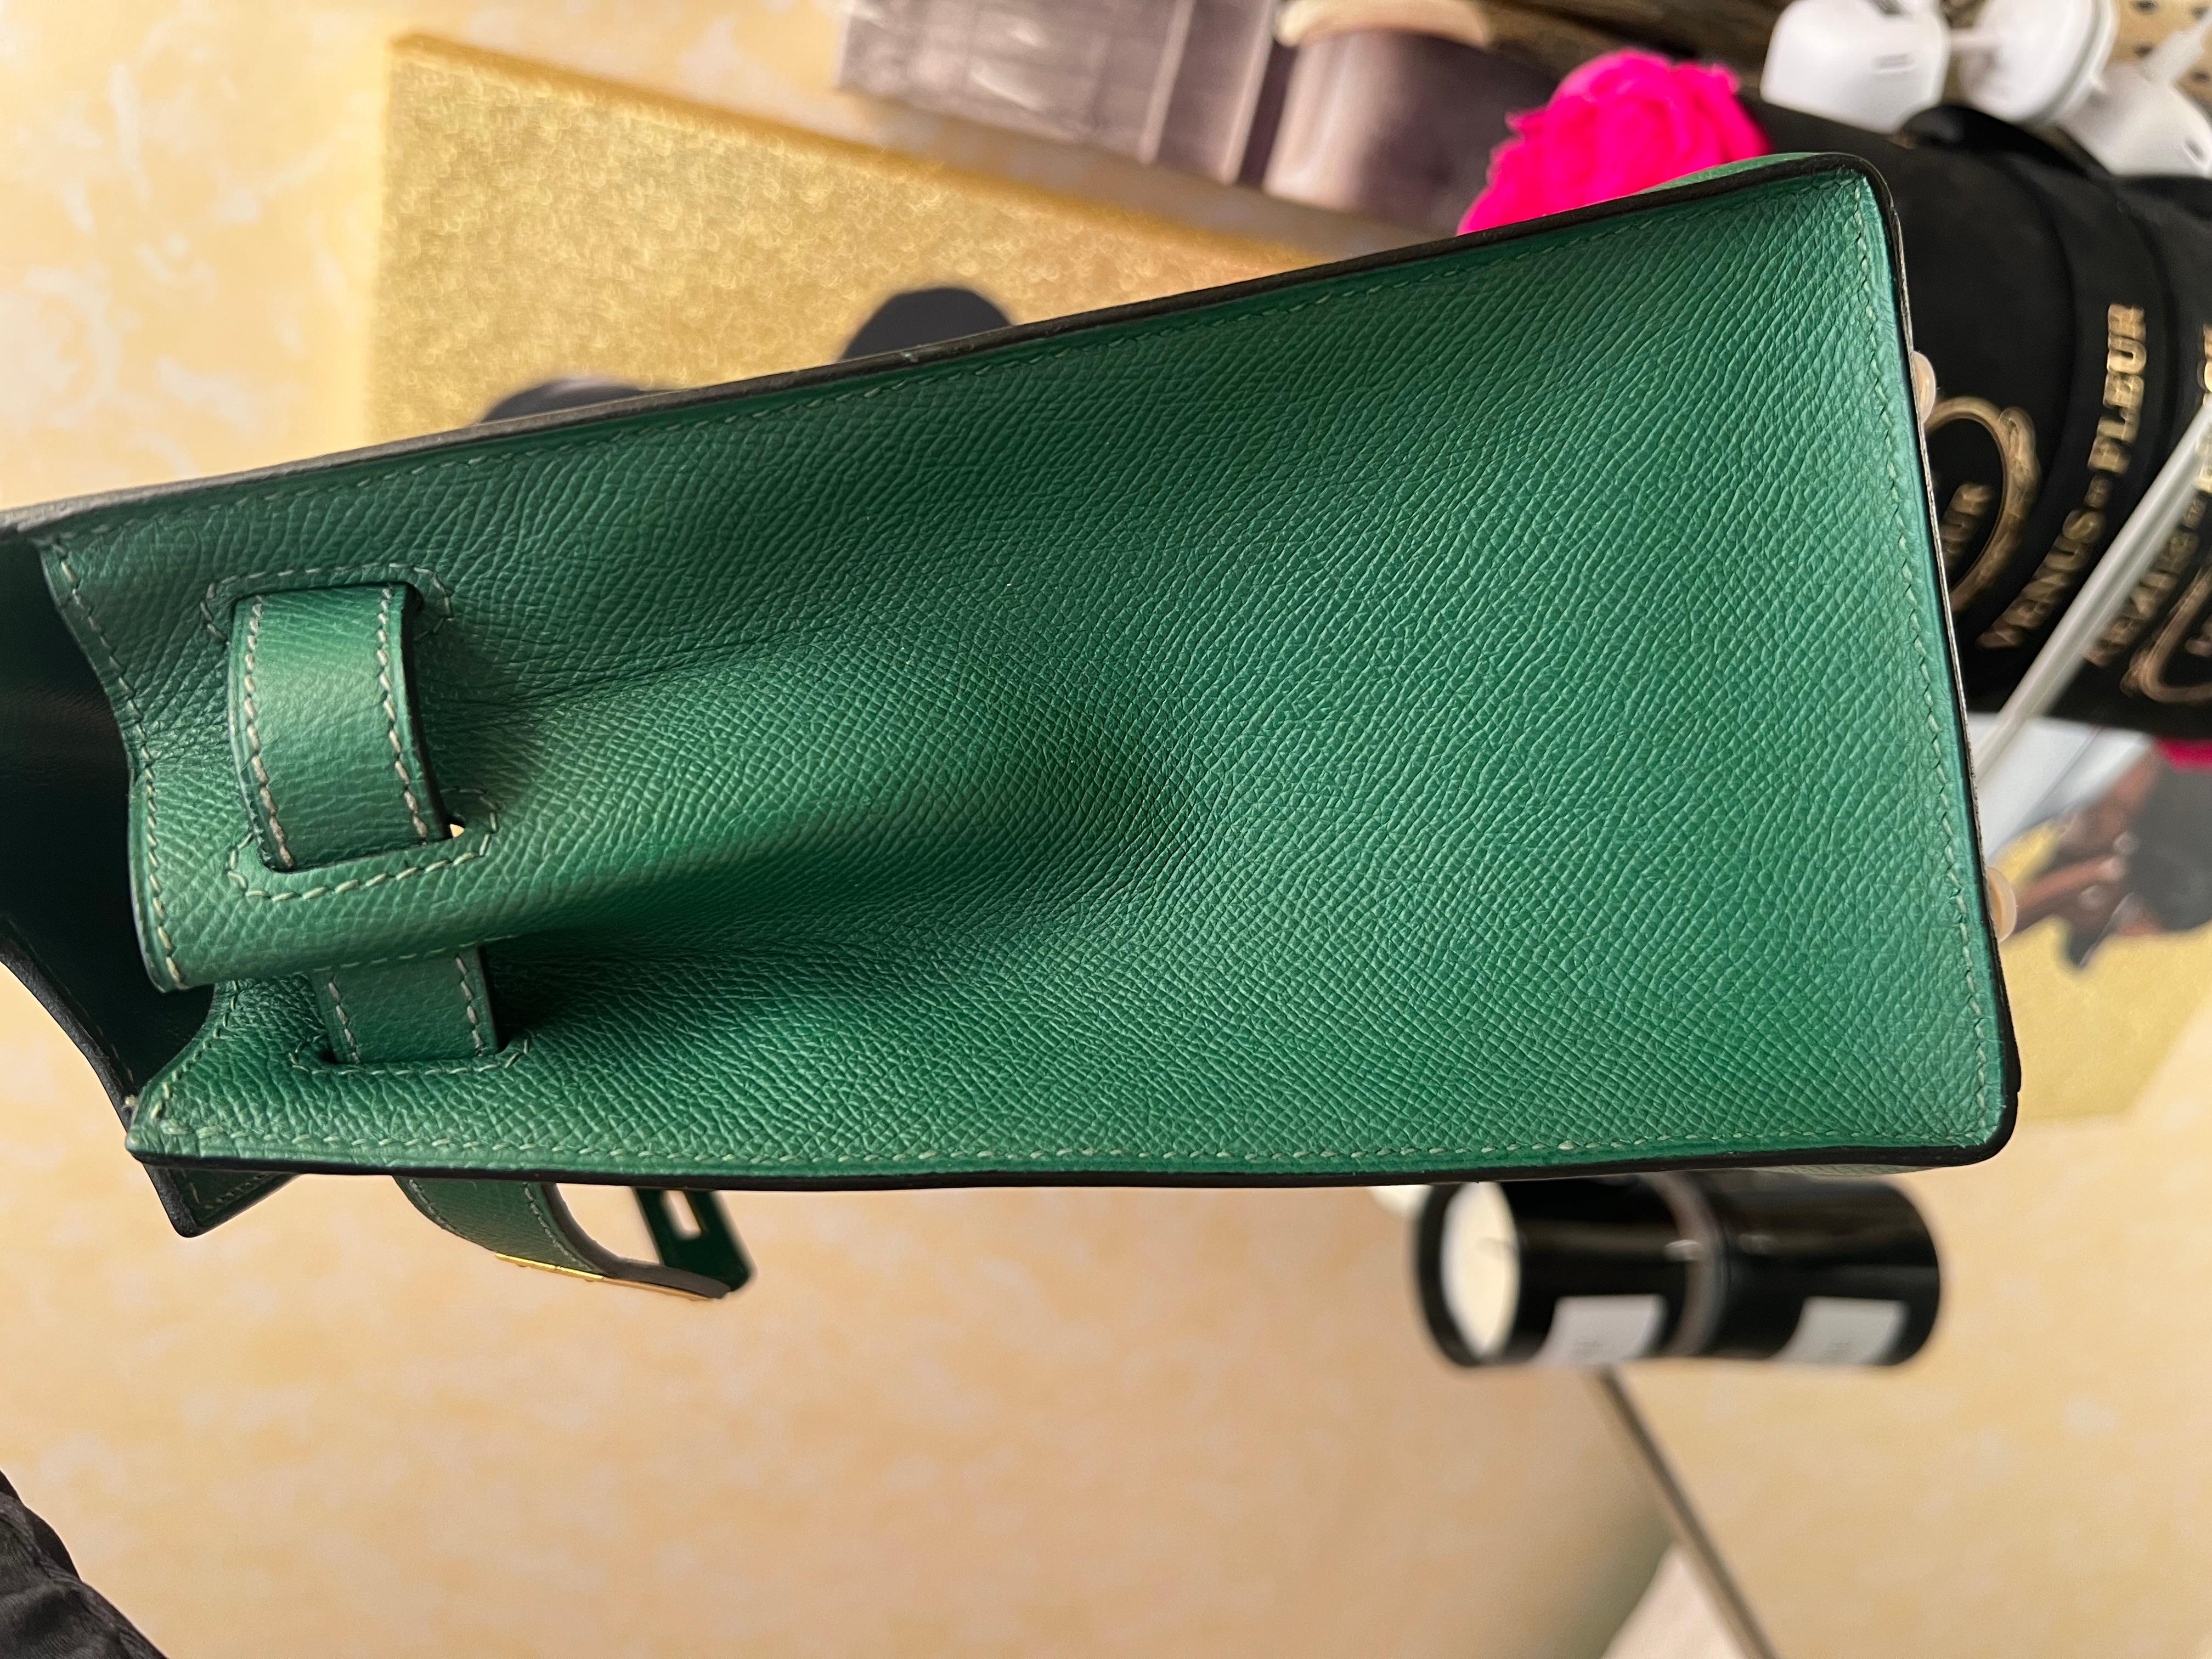 Hermes Kelly 28 Cactus Sellier Bag with GHW in Epsom leather  For Sale 9